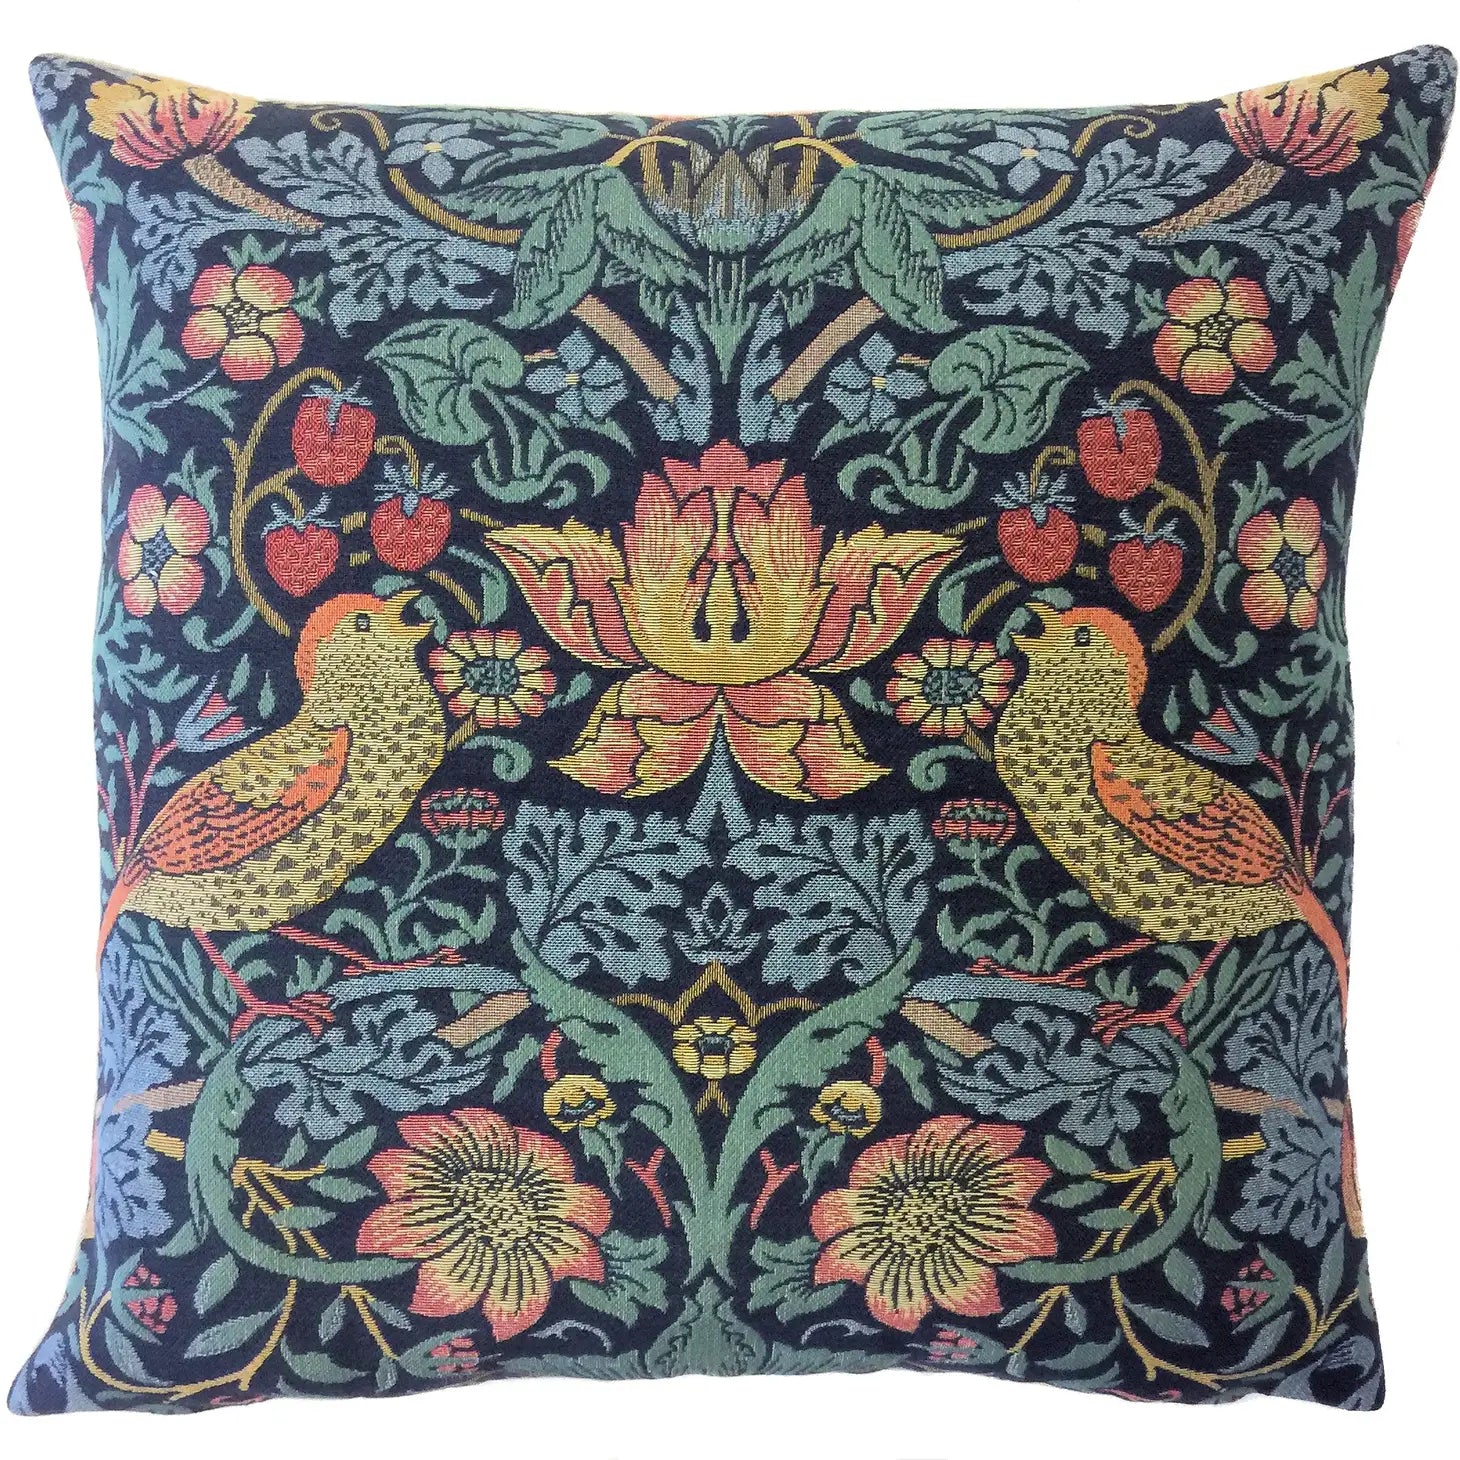 Strawberry Pickers Cushion - Medieval Art